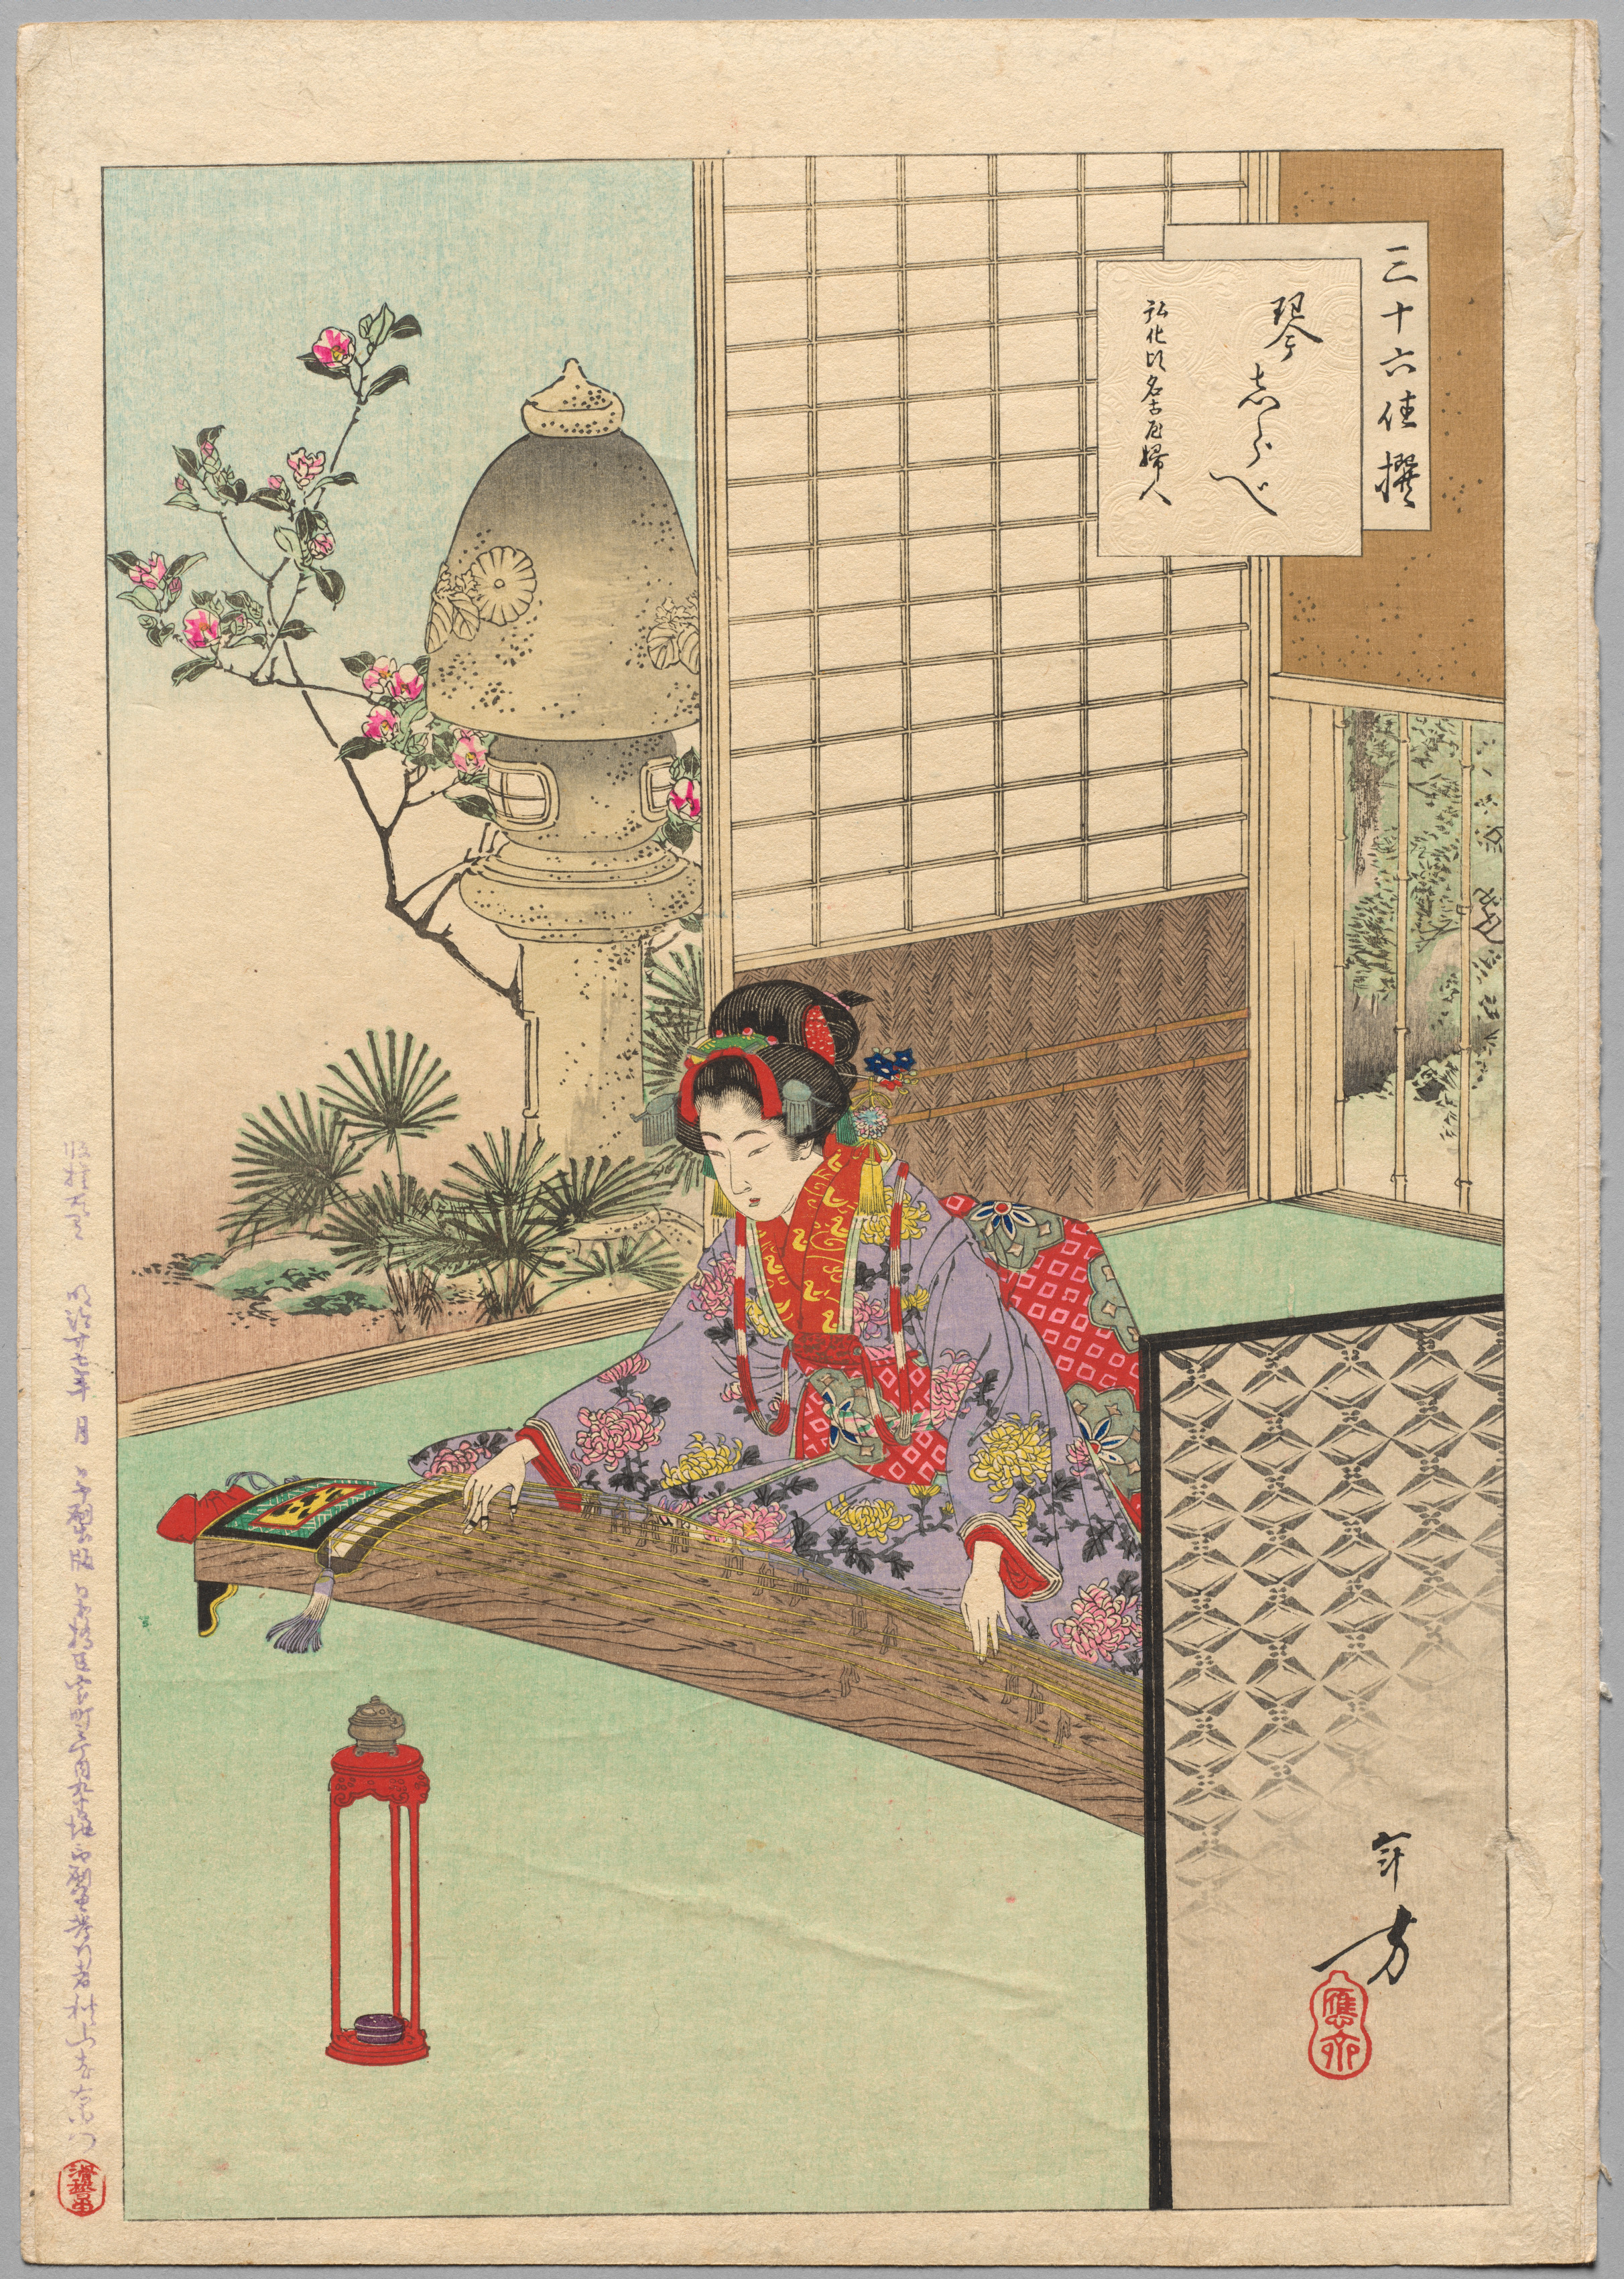 Playing the Koyo, A Lady from Nagoya of the Kōka Era (1844-48), from the series Thirty-six Elegant Selections